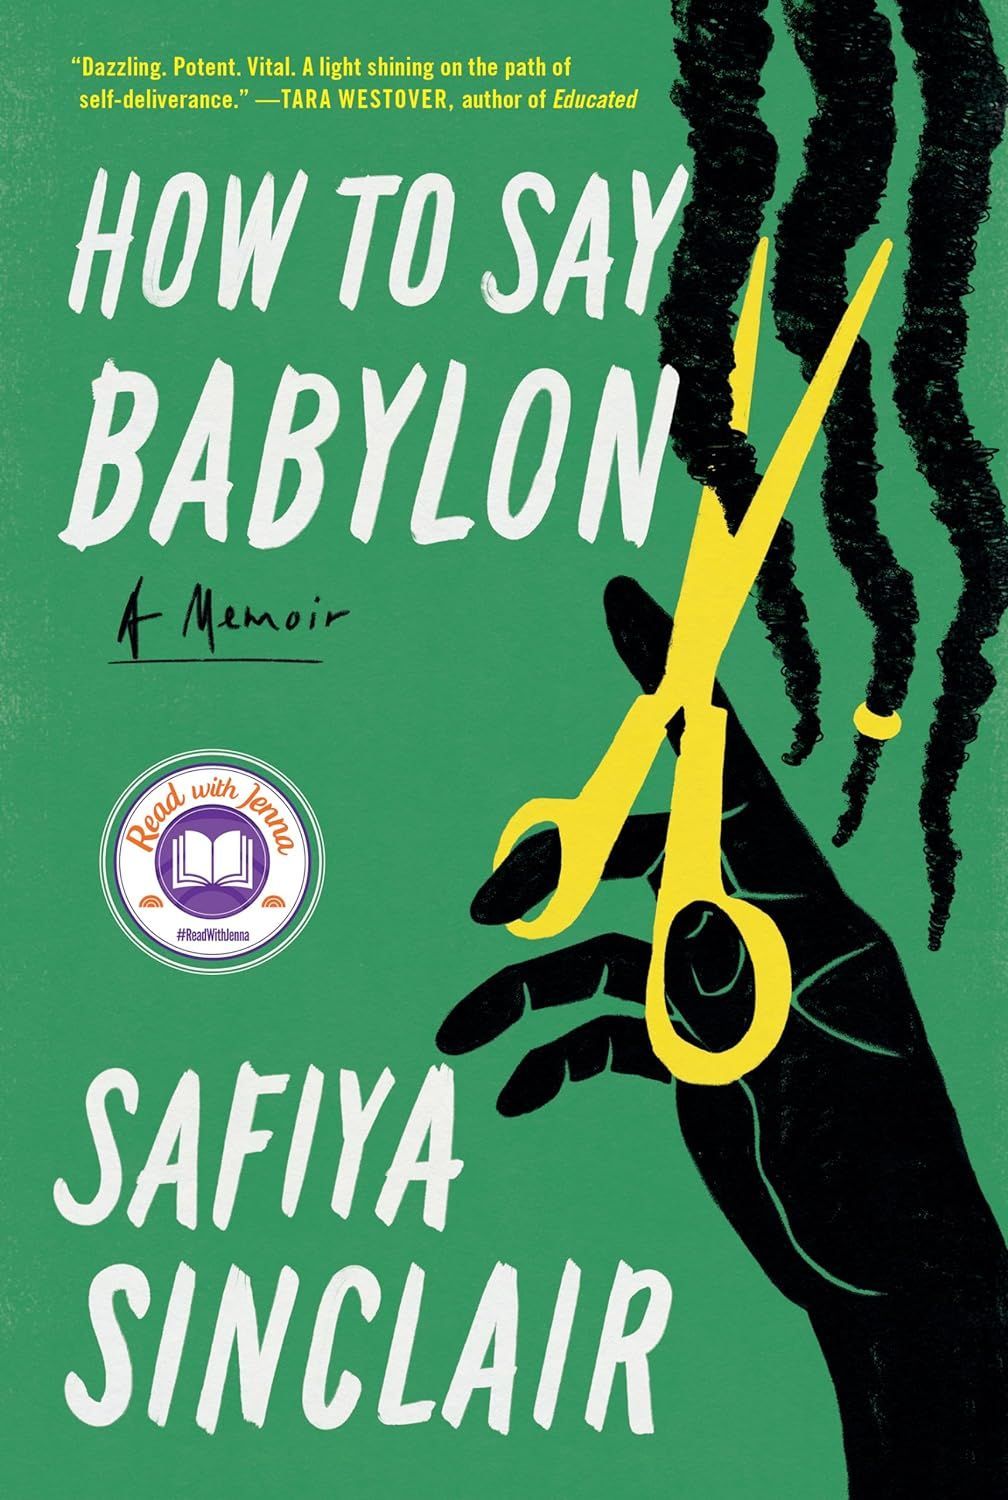 Poetry as an Act of Survival: A Conversation With Safiya Sinclair